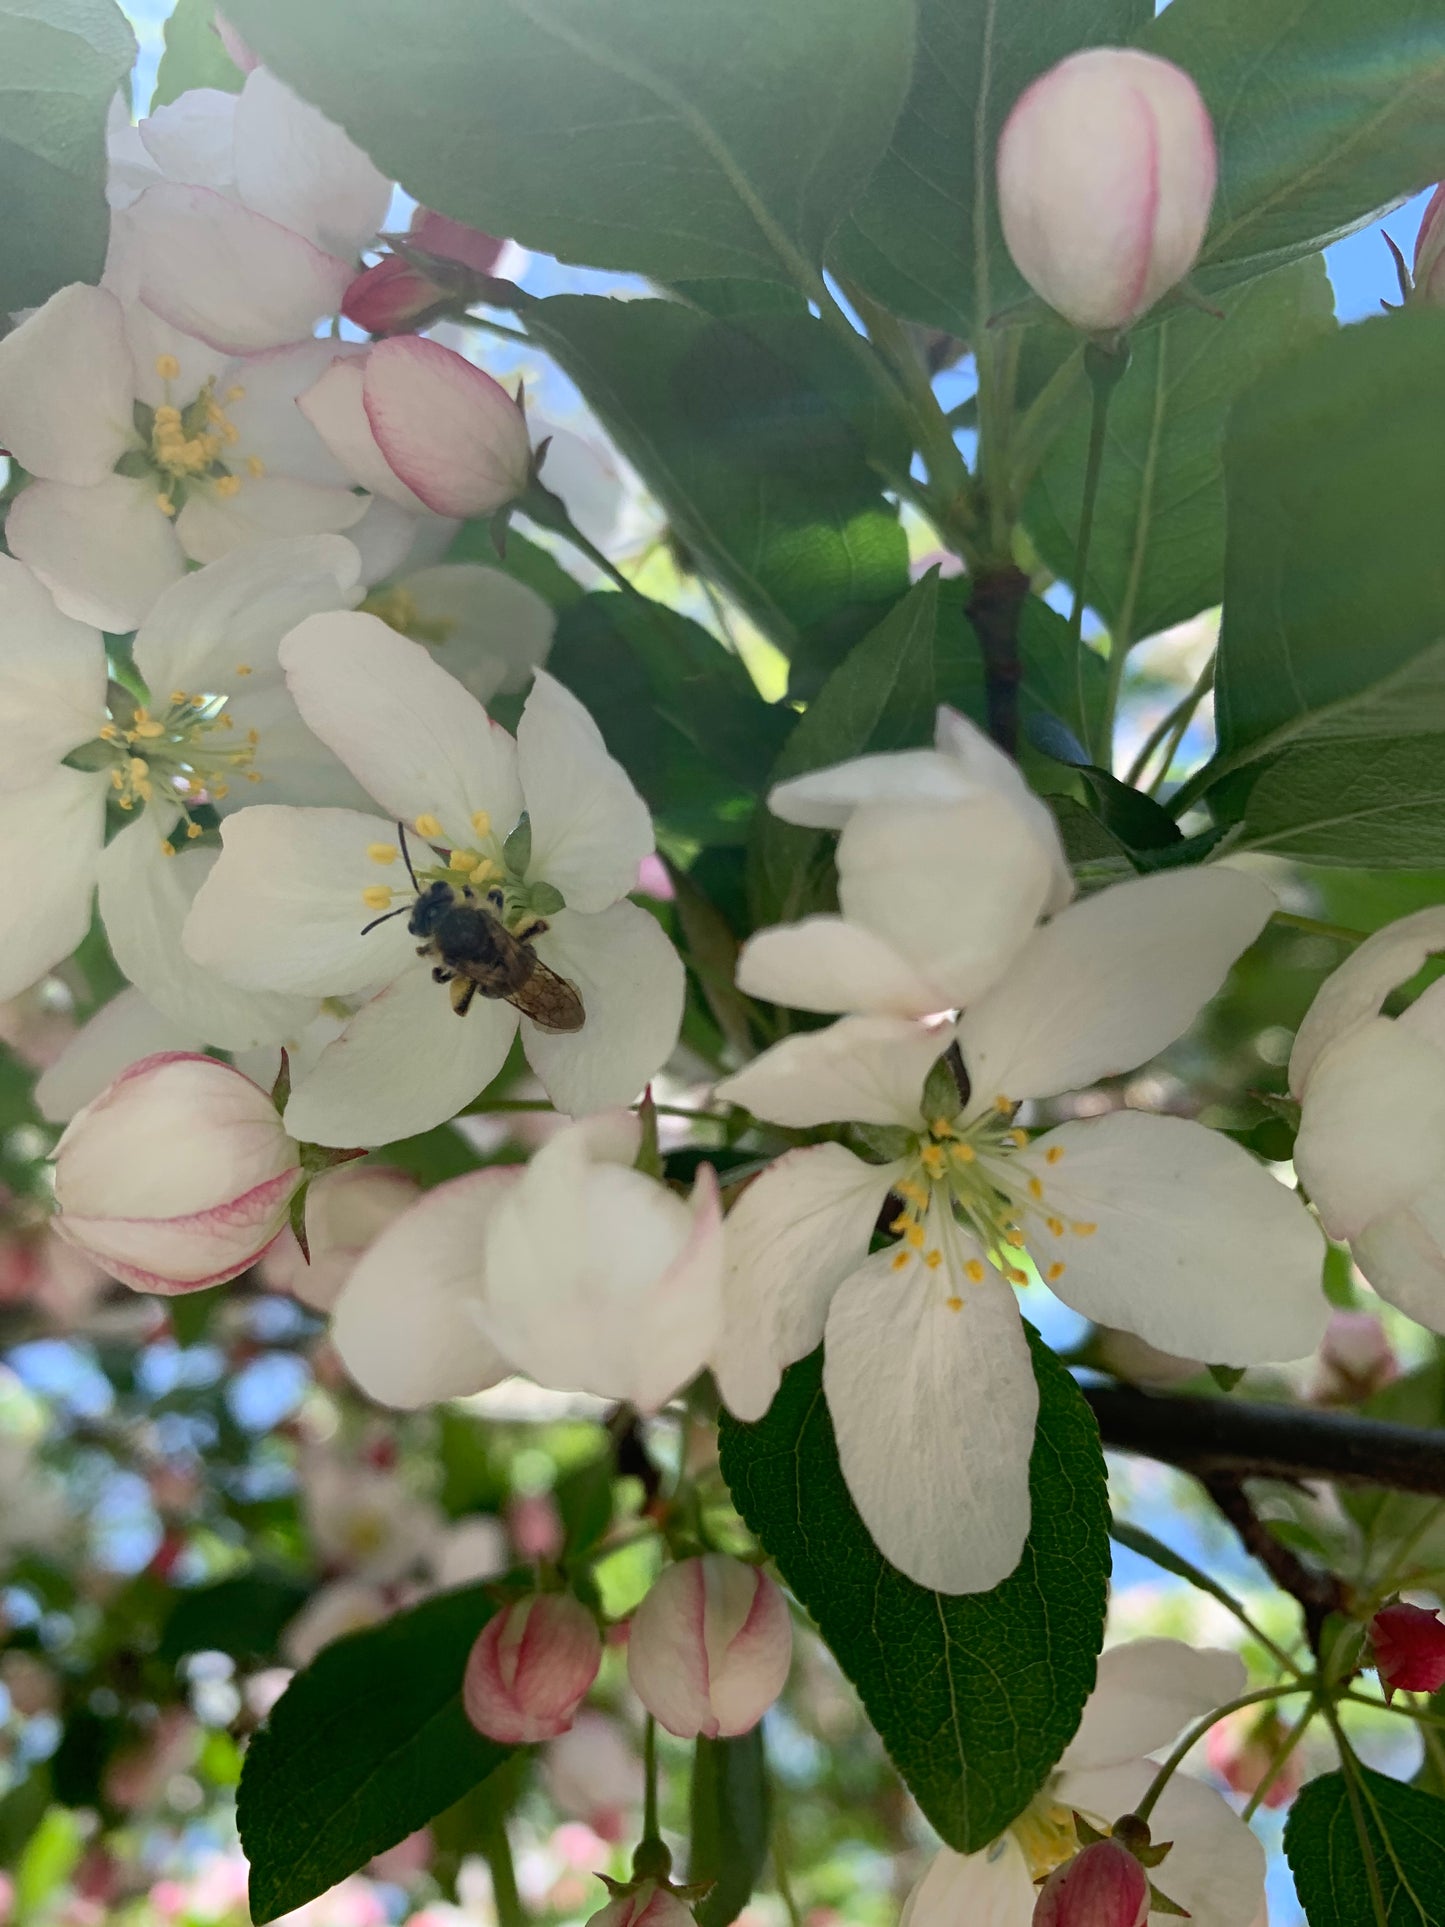 May 18, 2021 Apple blossoms and bees